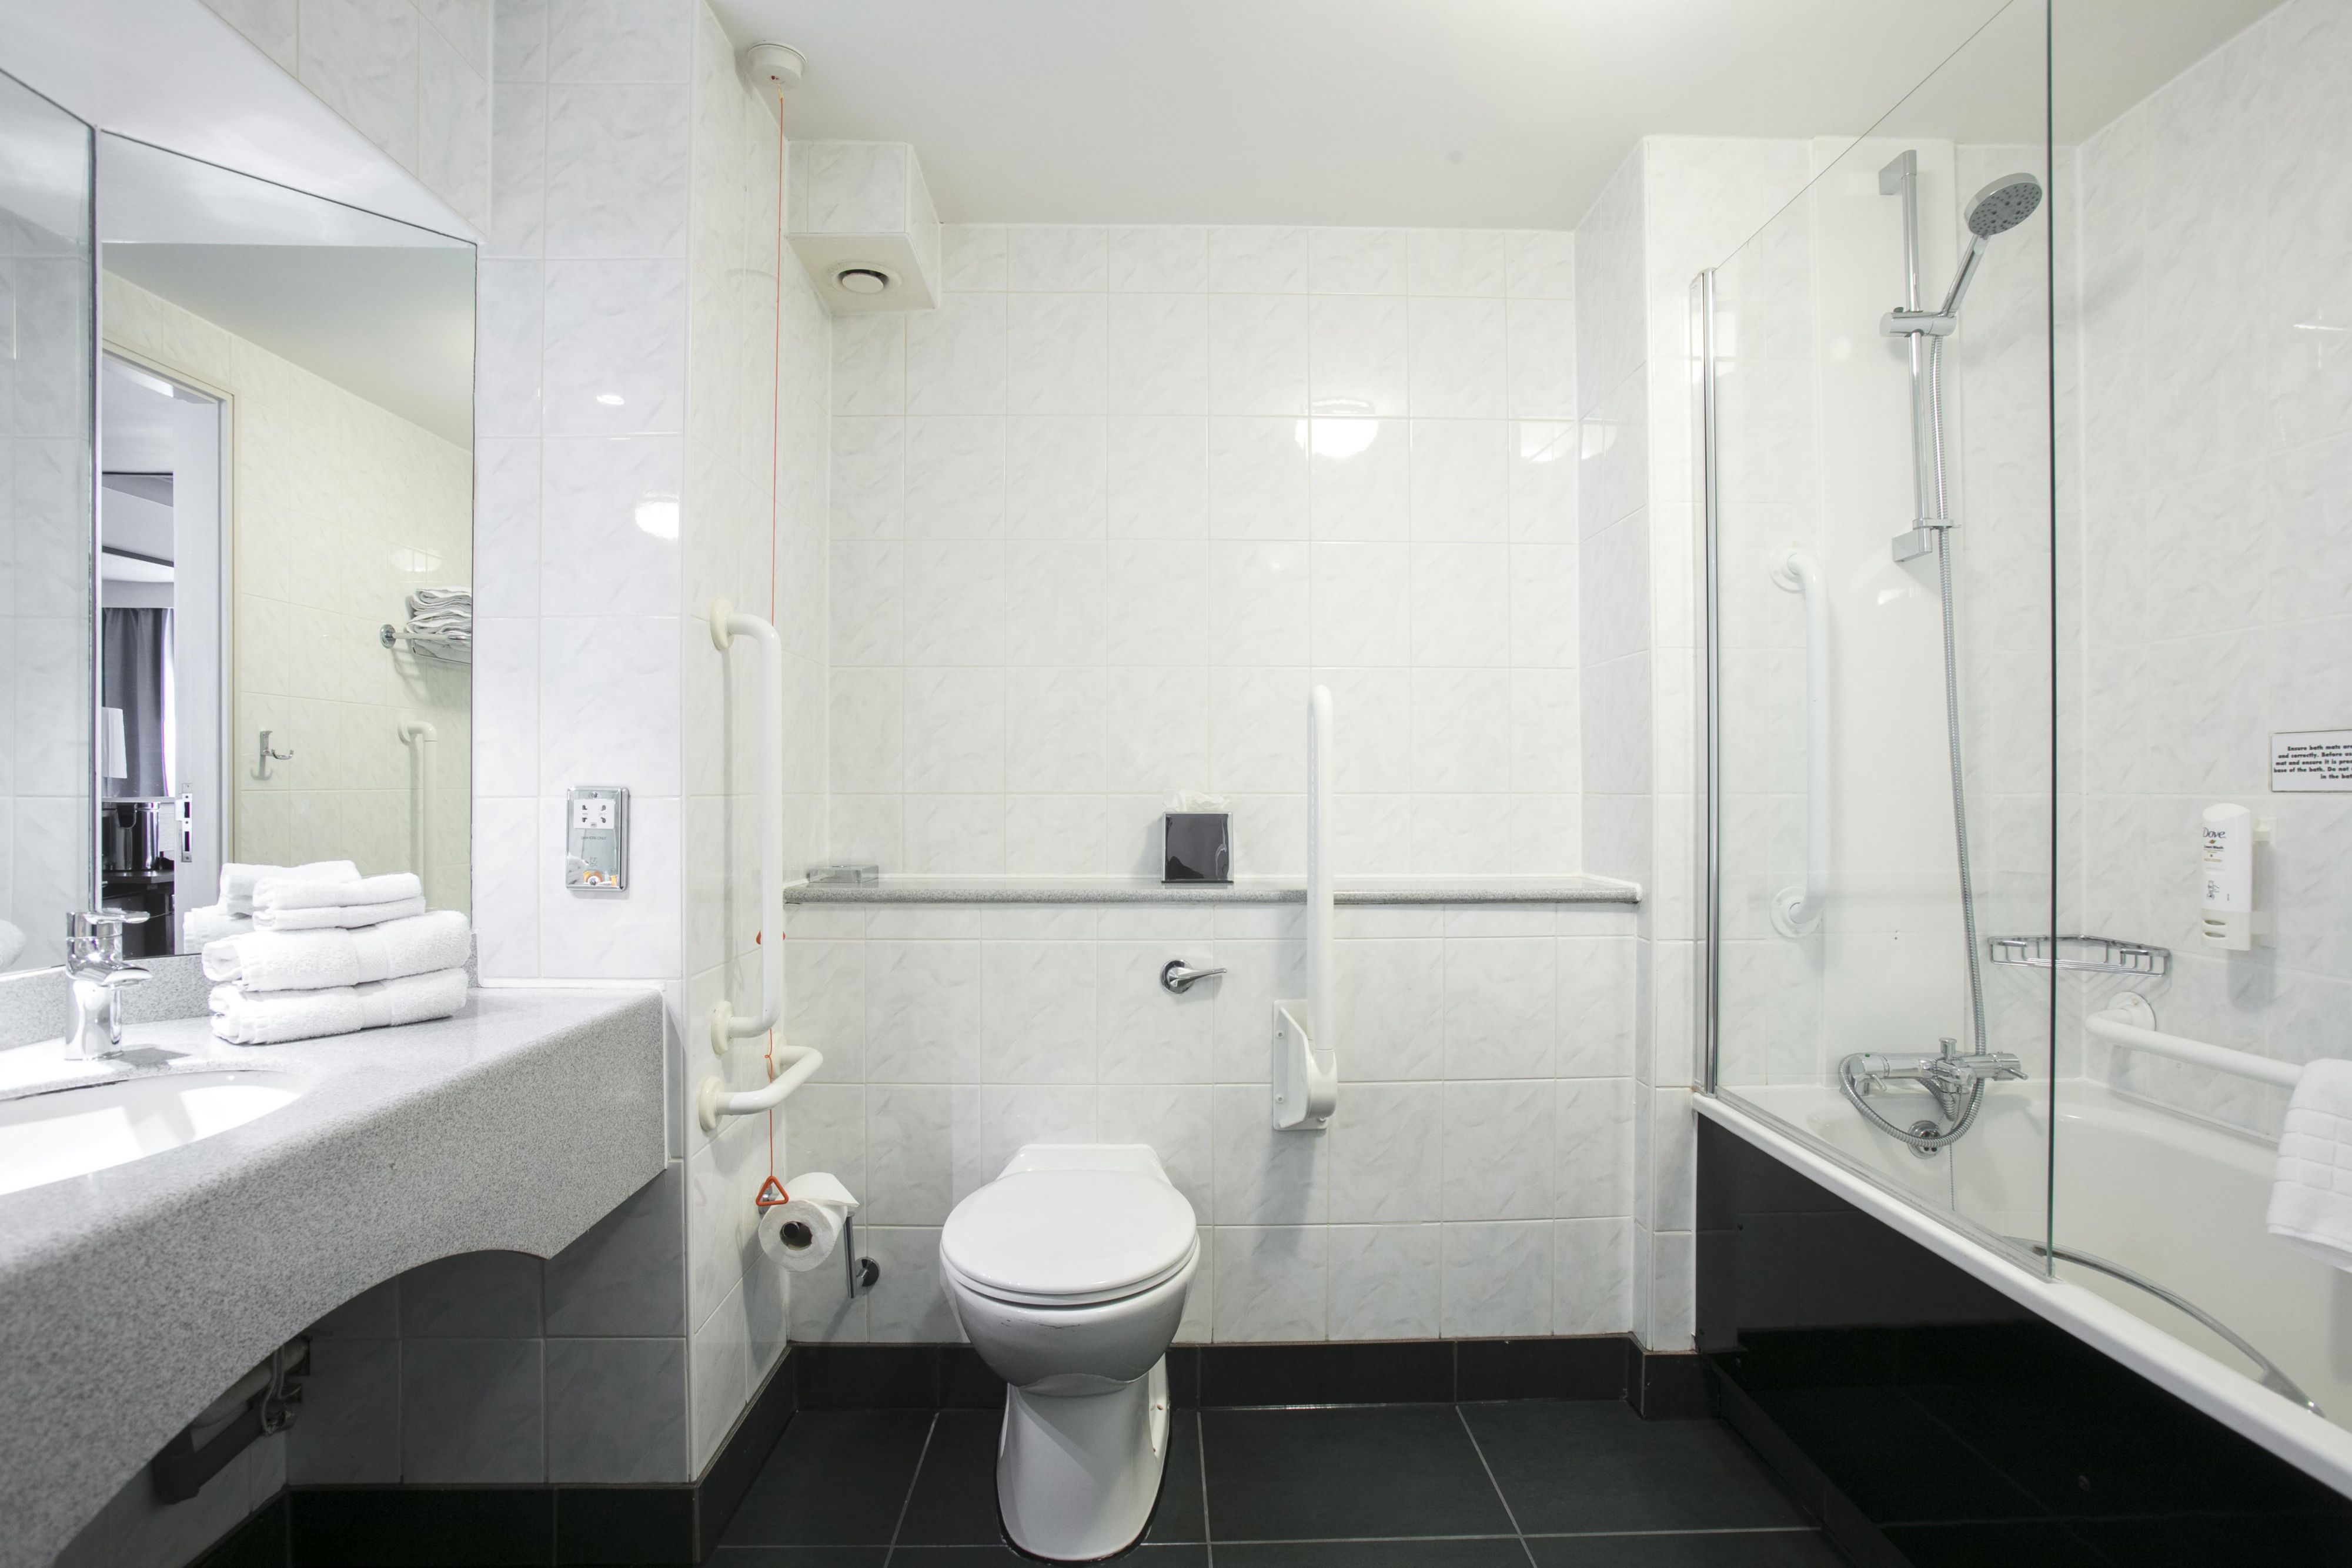 Accessible Room Bathroom, with grab rails.